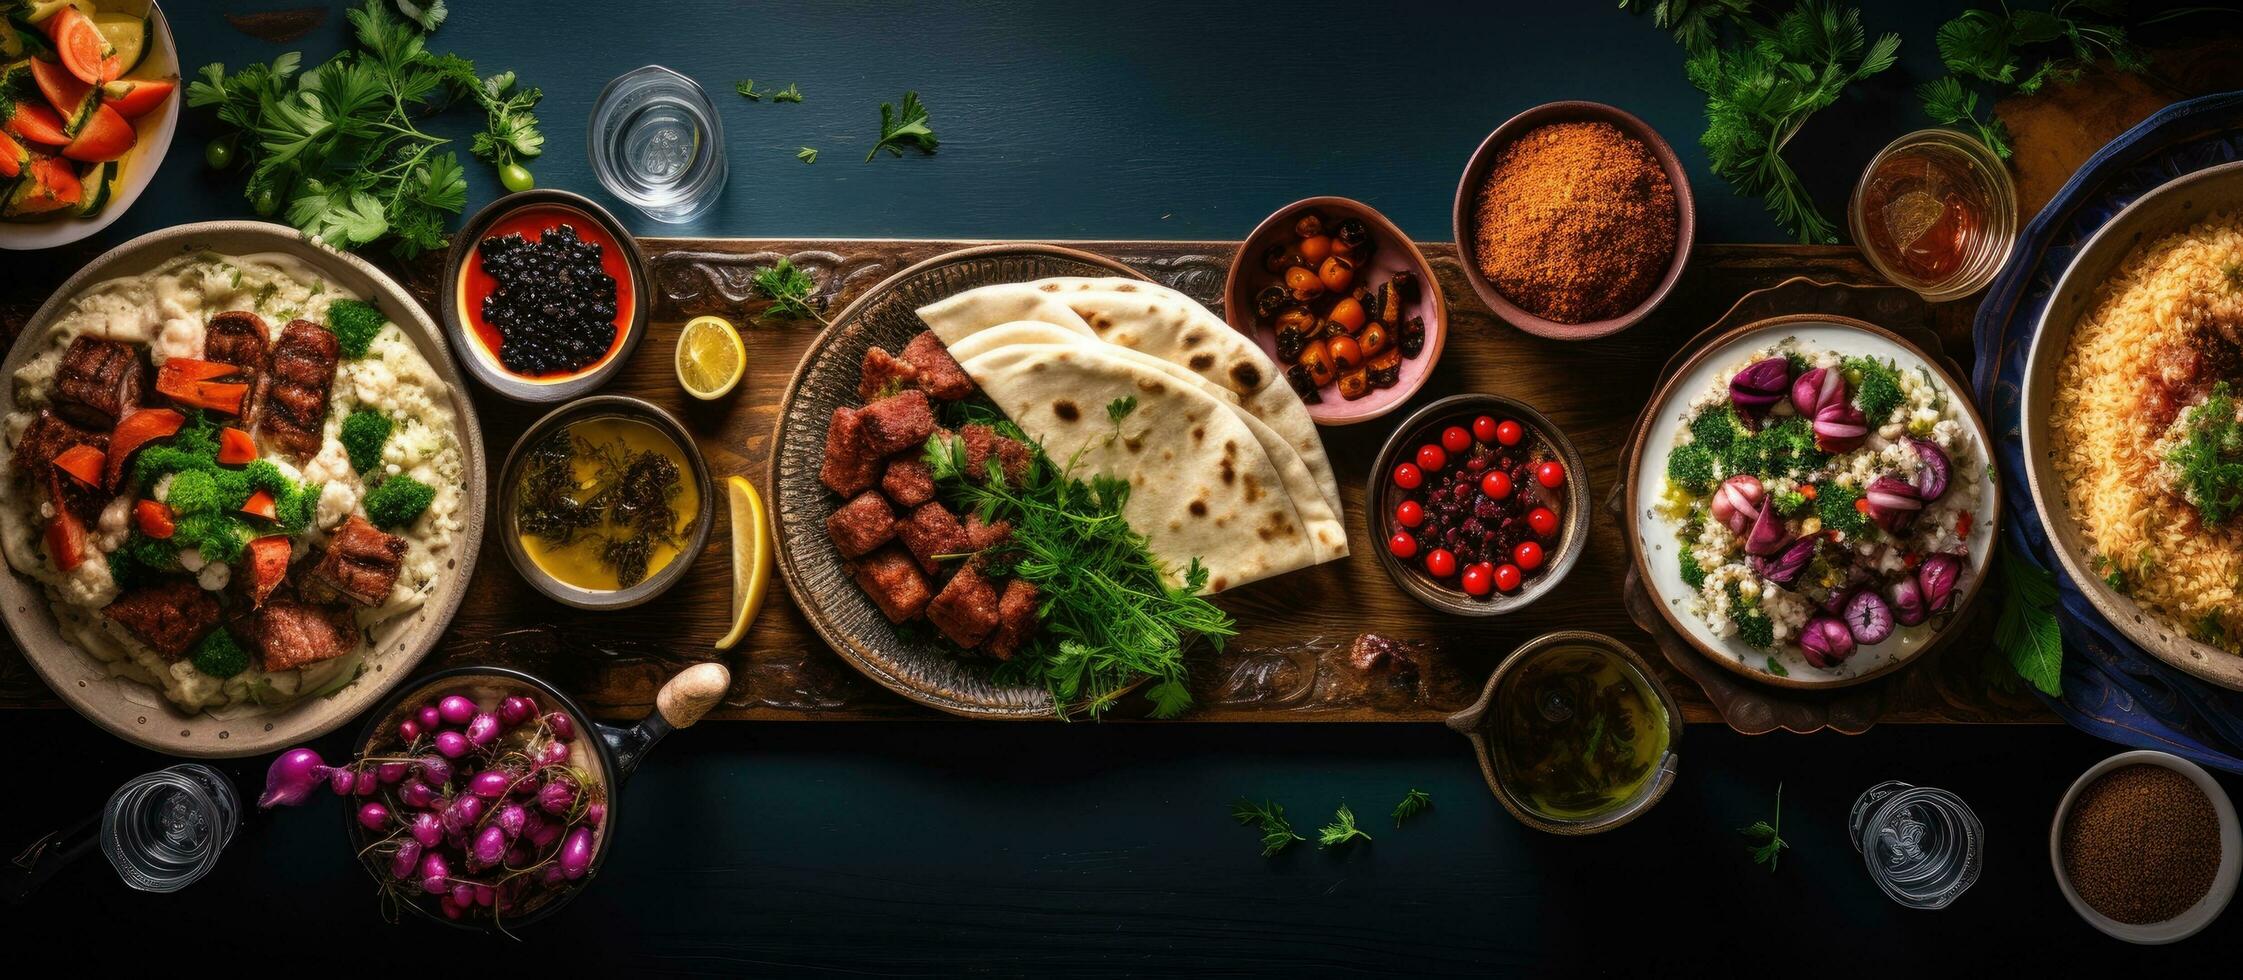 Arabic and Middle Eastern food displayed on a dinner table. The meal includes meat kebab, hummus, photo